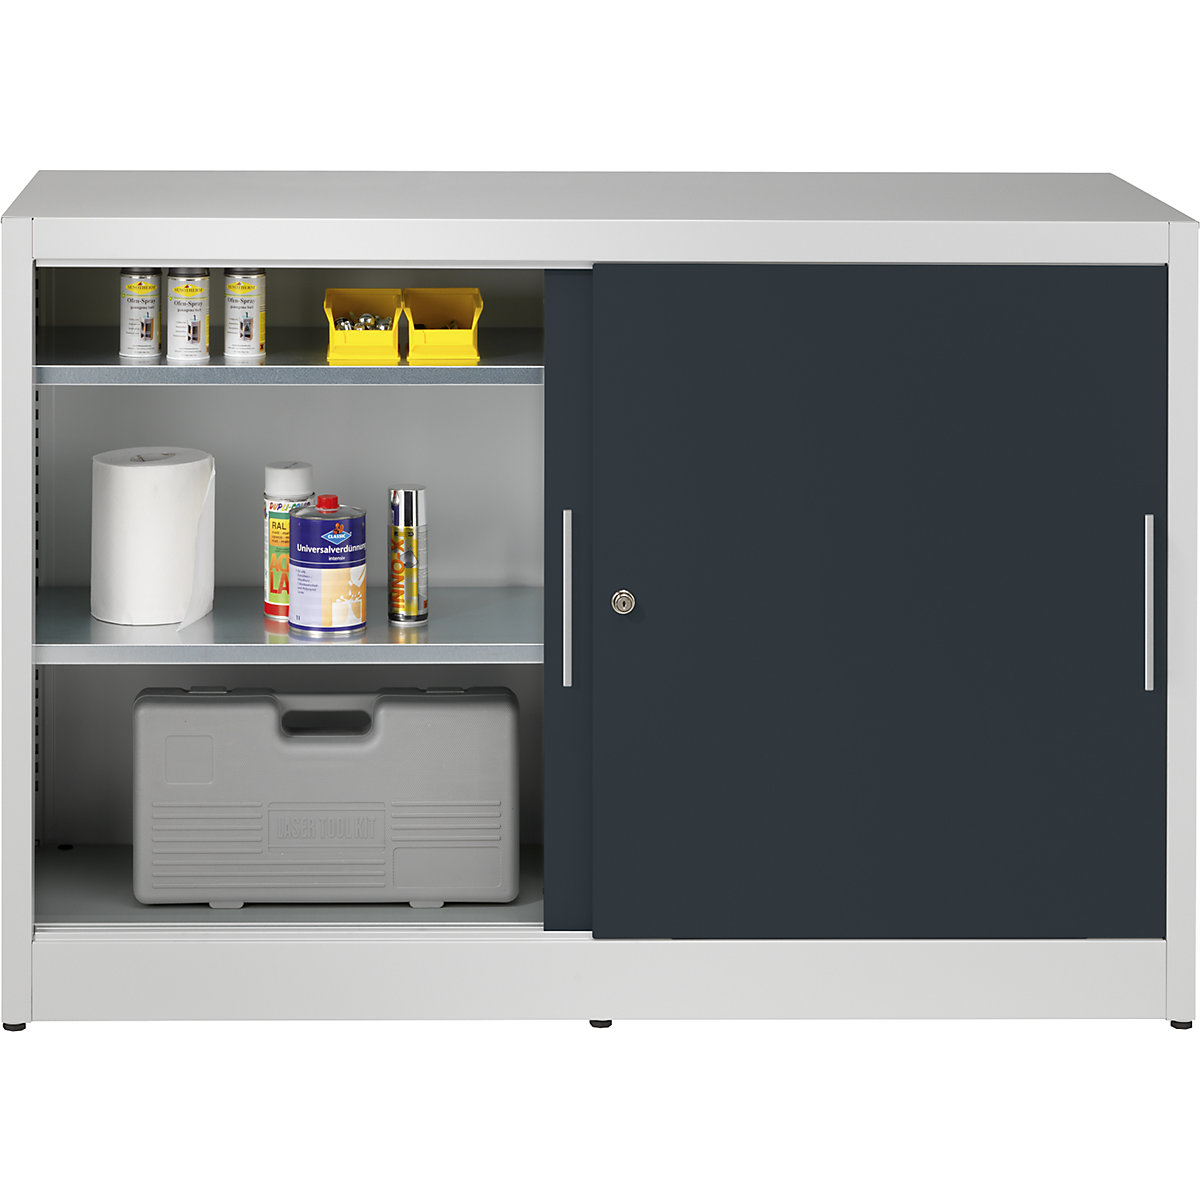 Sliding door cupboard, height 1000 mm – eurokraft pro, with centre partition and 2 x 2 shelves, width 1500 mm, depth 500 mm, doors charcoal RAL 7016-4